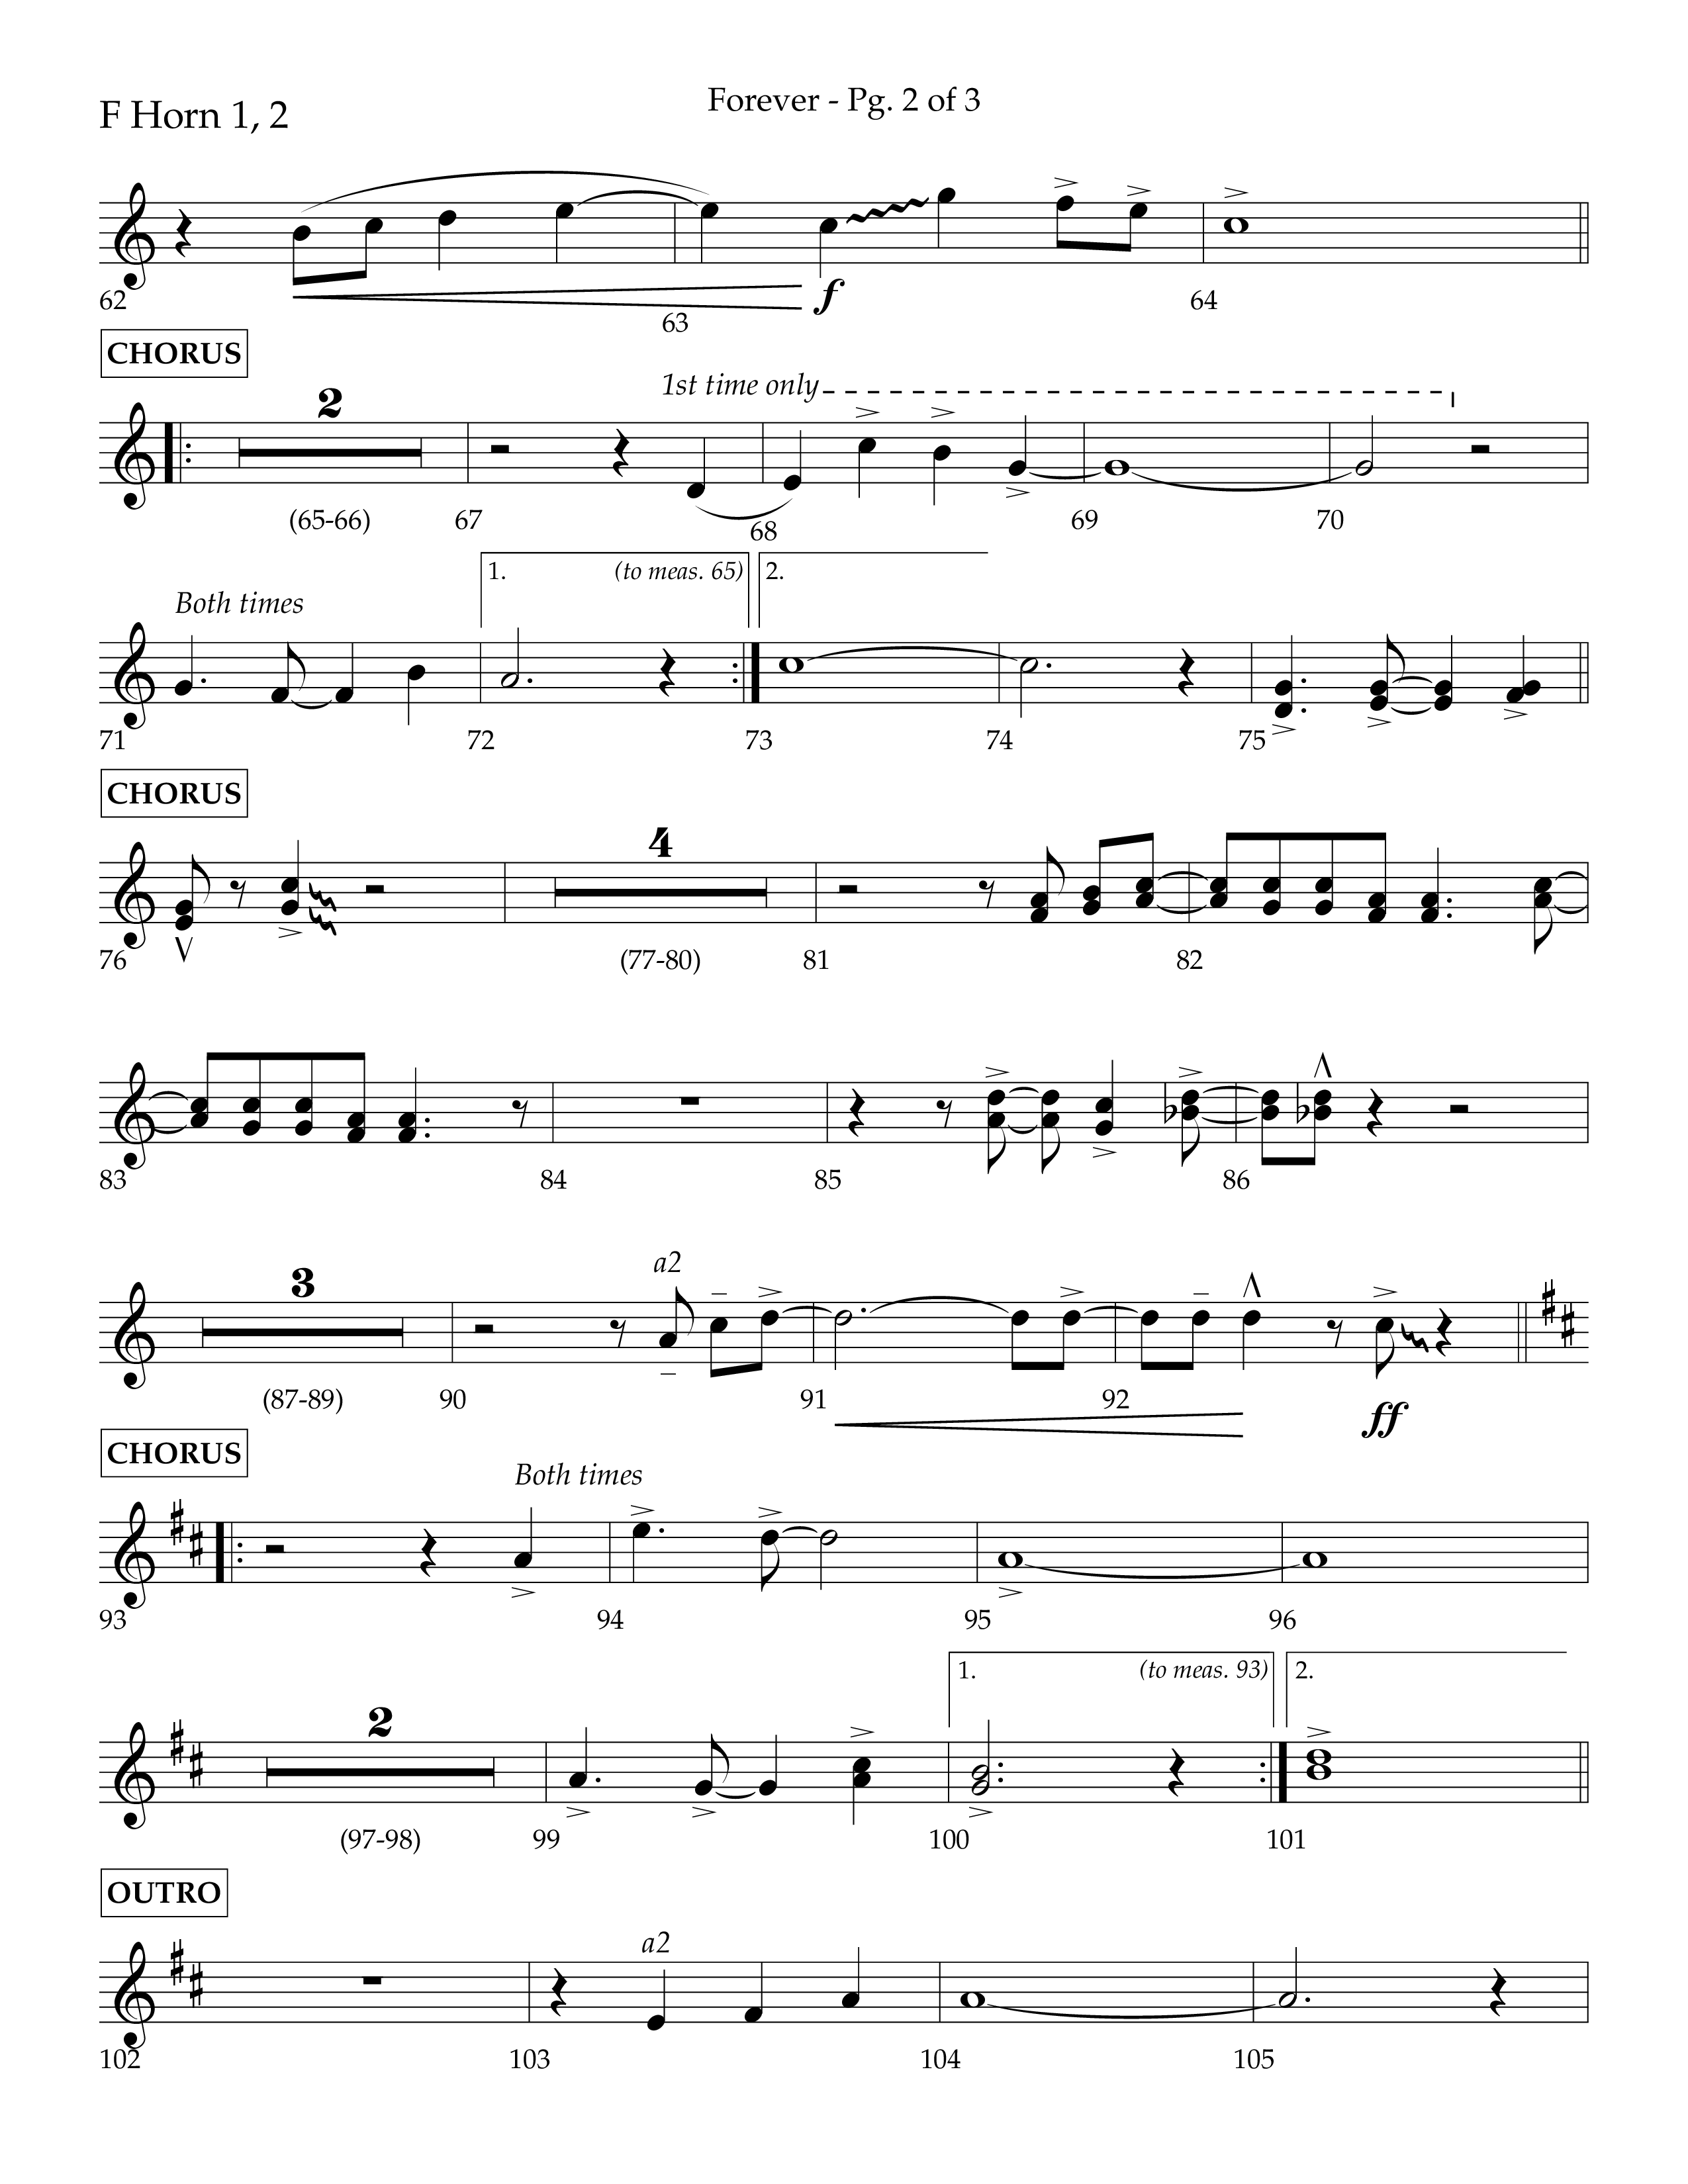 Forever (with Sing Praise) (Choral Anthem SATB) French Horn 1/2 (Lifeway Choral / Arr. Danny Zaloudik)